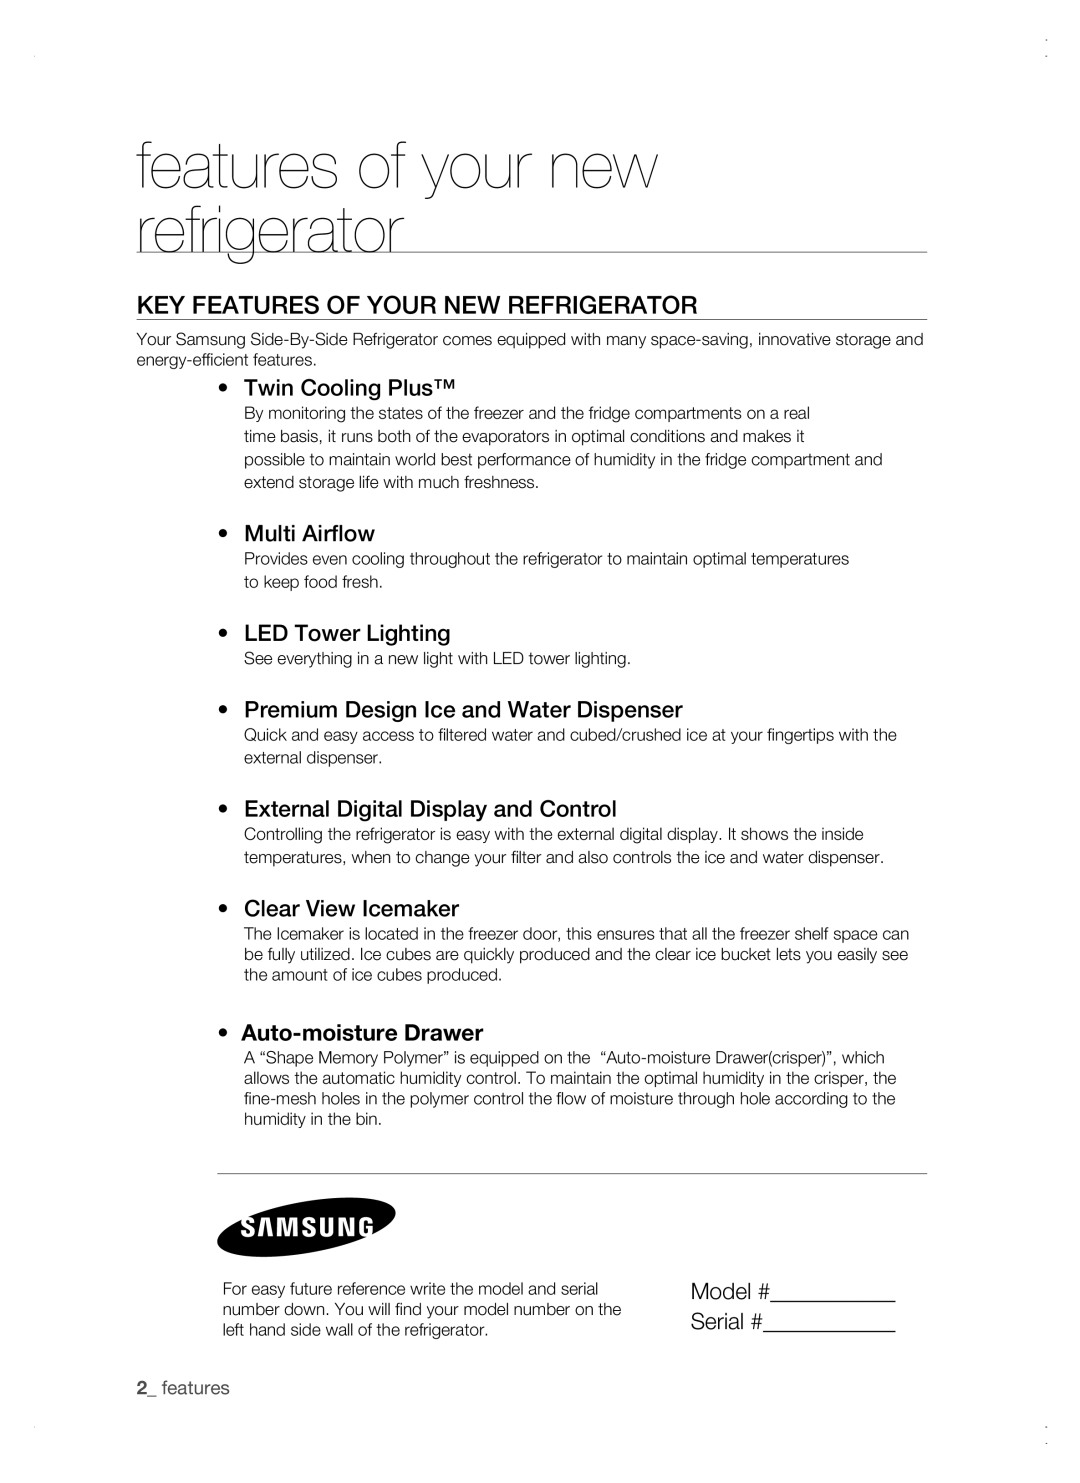 Samsung RSG5 Key features of your new refrigerator, Twin Cooling Plus, Multi Airflow, LED Tower Lighting,  features 